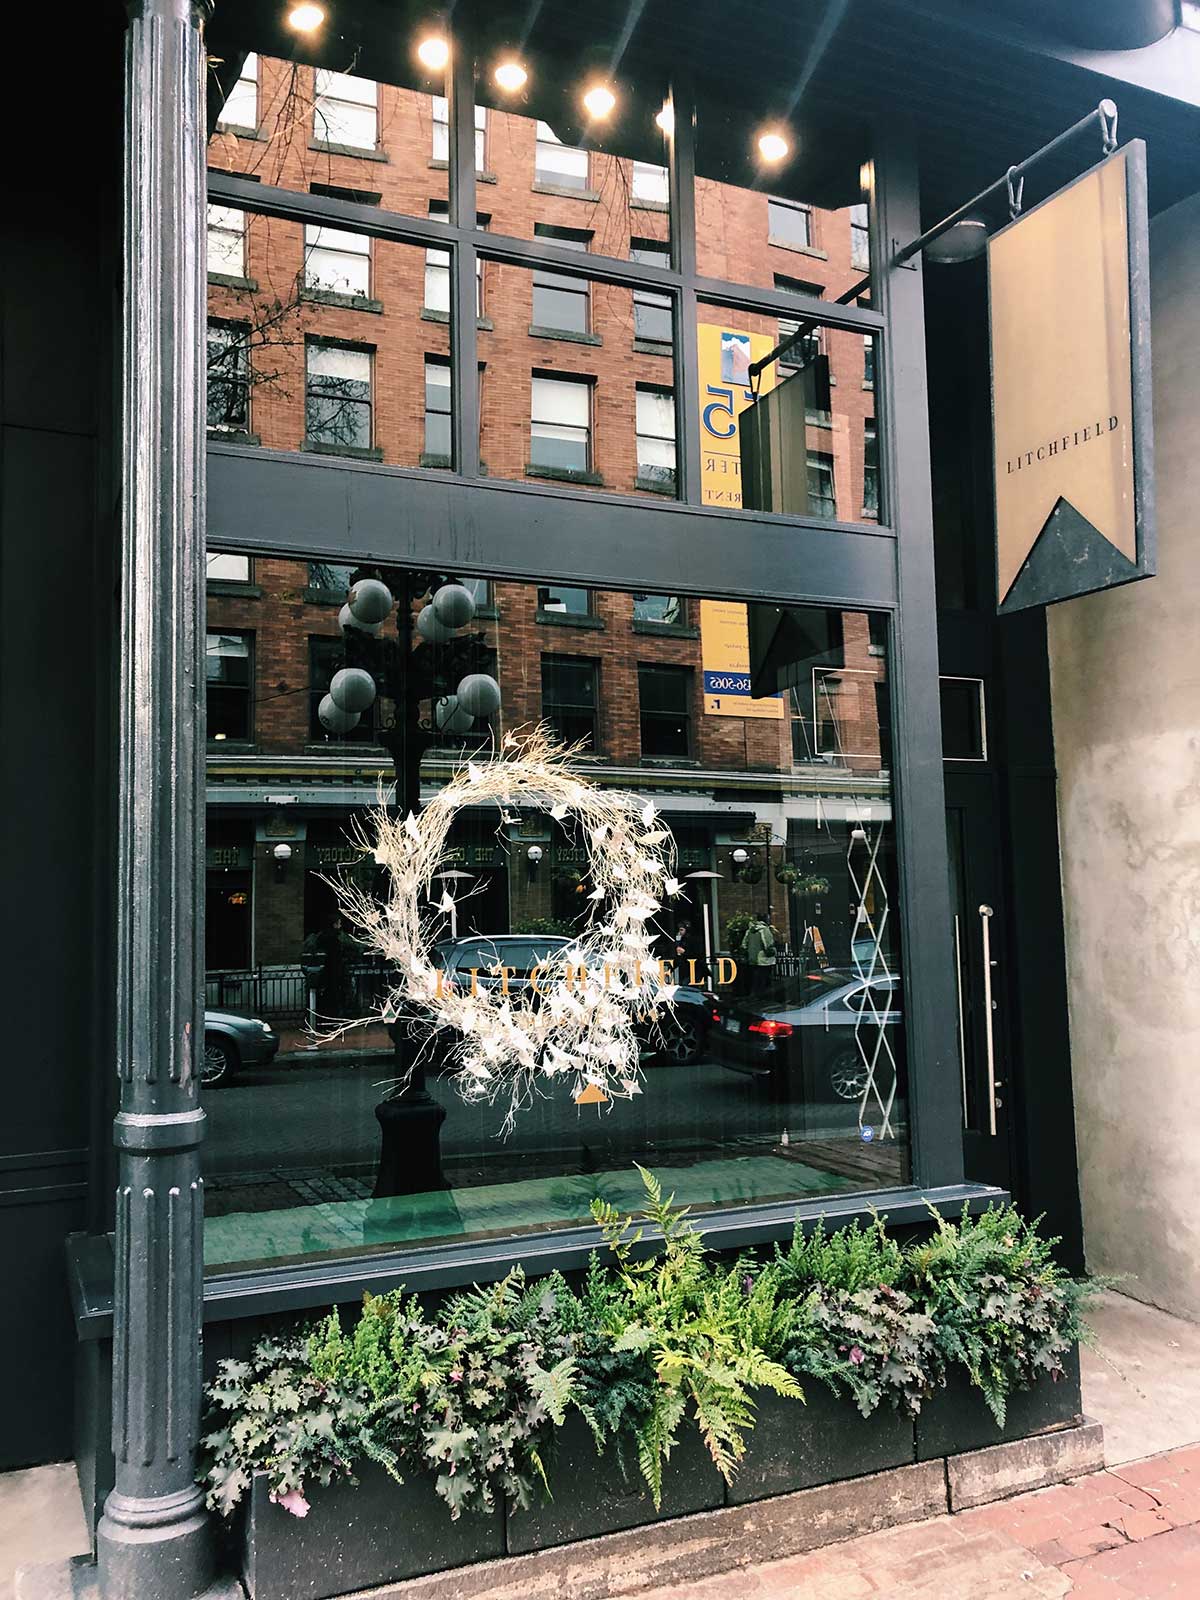 Litchfield in Vancouver showing their 2018 holiday display design